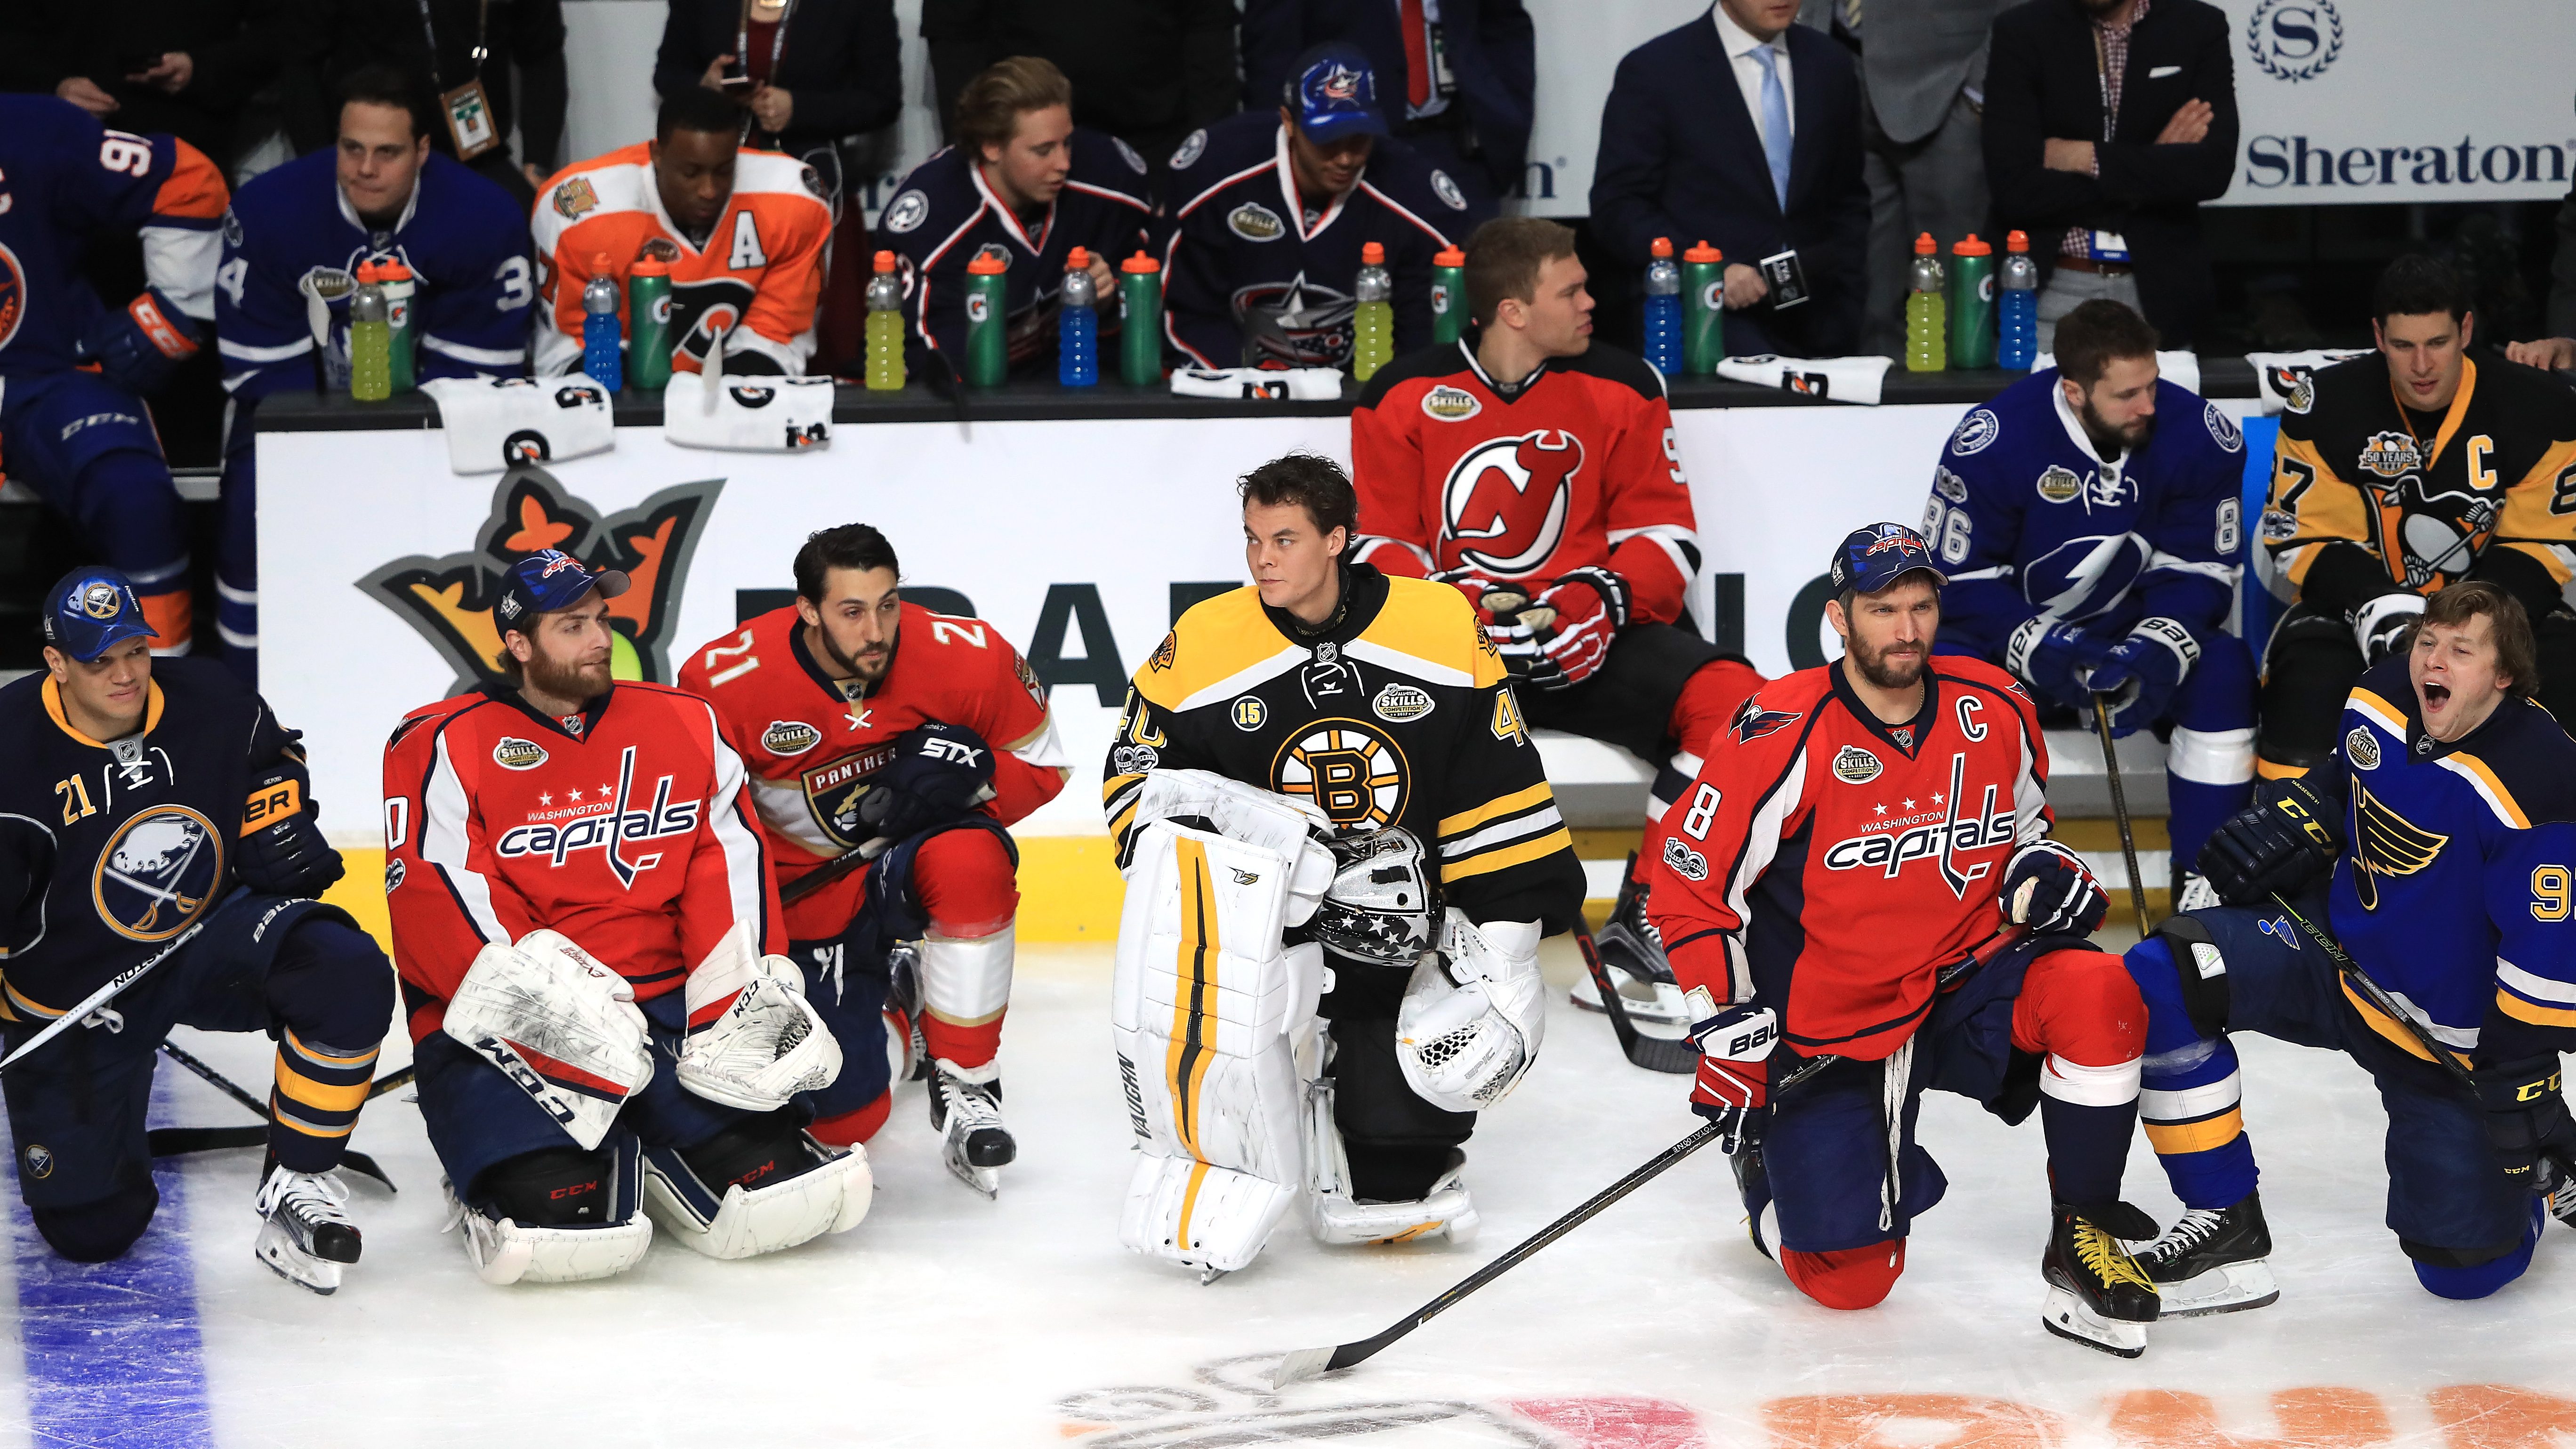 NHL Skills Competition Live Stream How to Watch Online